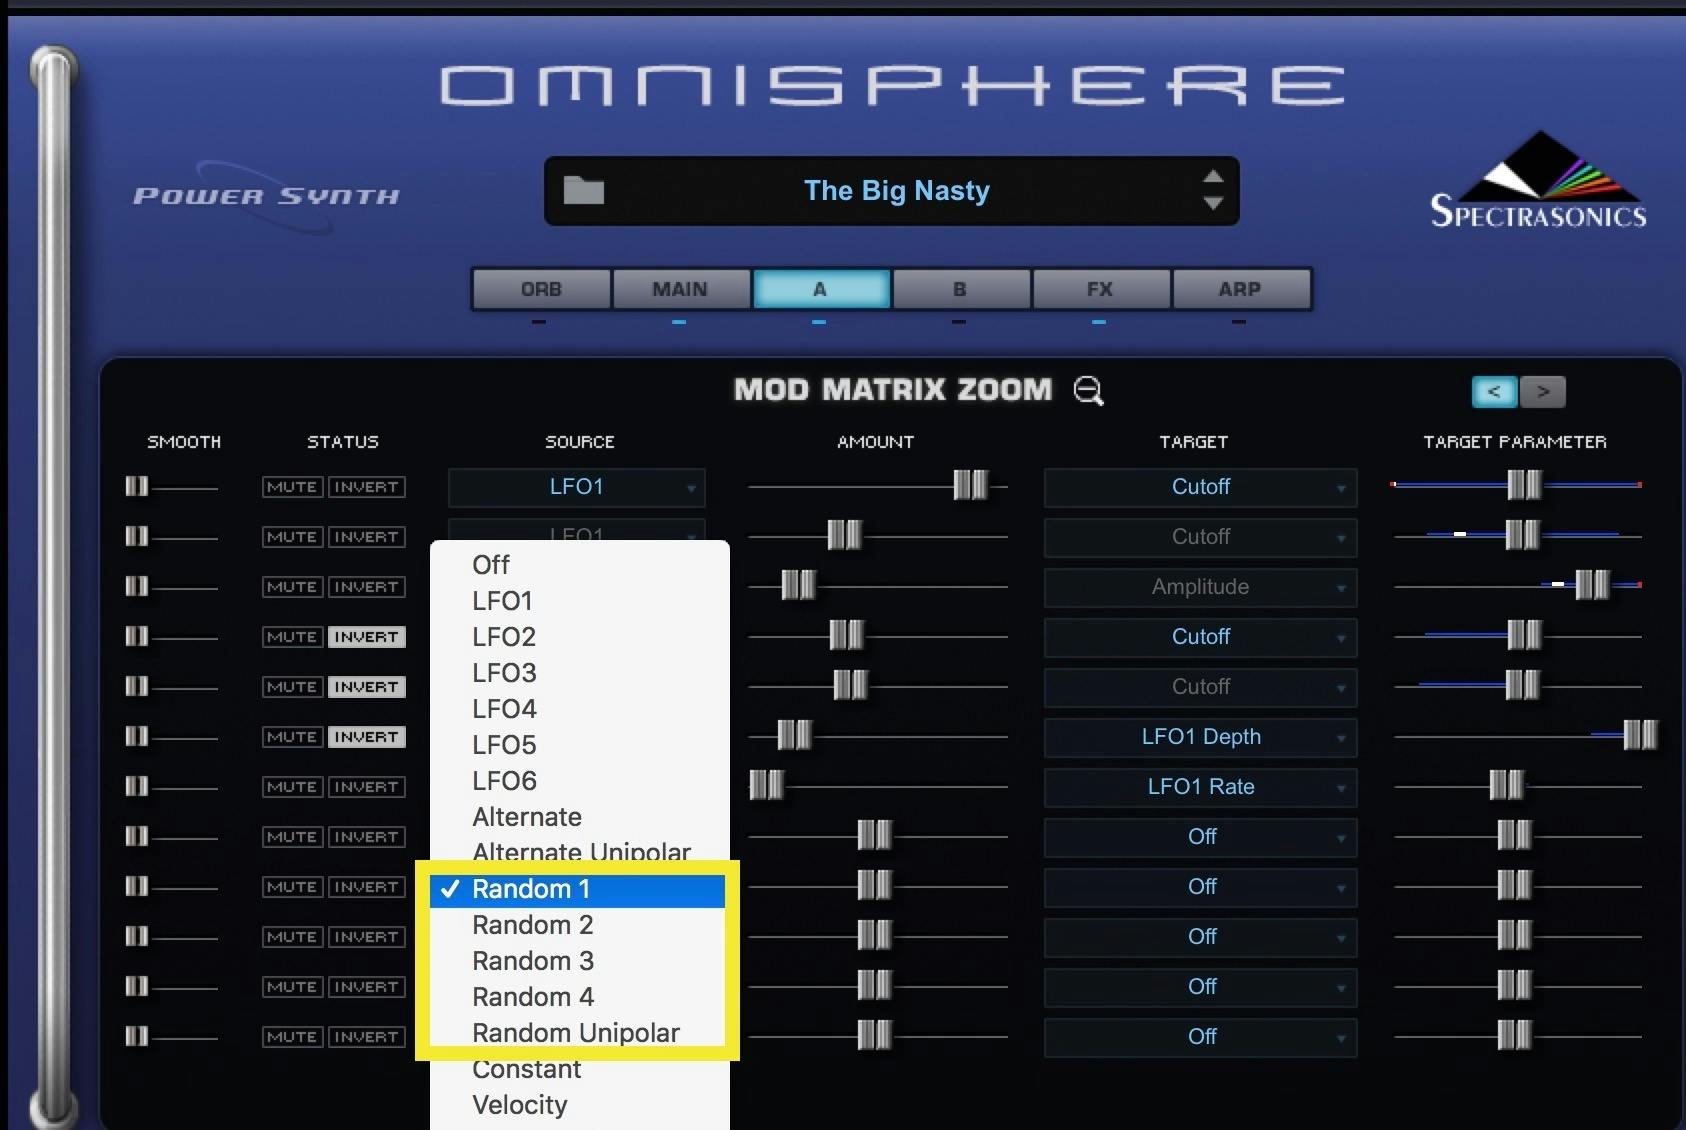 Omnisphere 2 from Spectrasonics includes several possible random modulation sources that do not sound exactly the same on each playback.